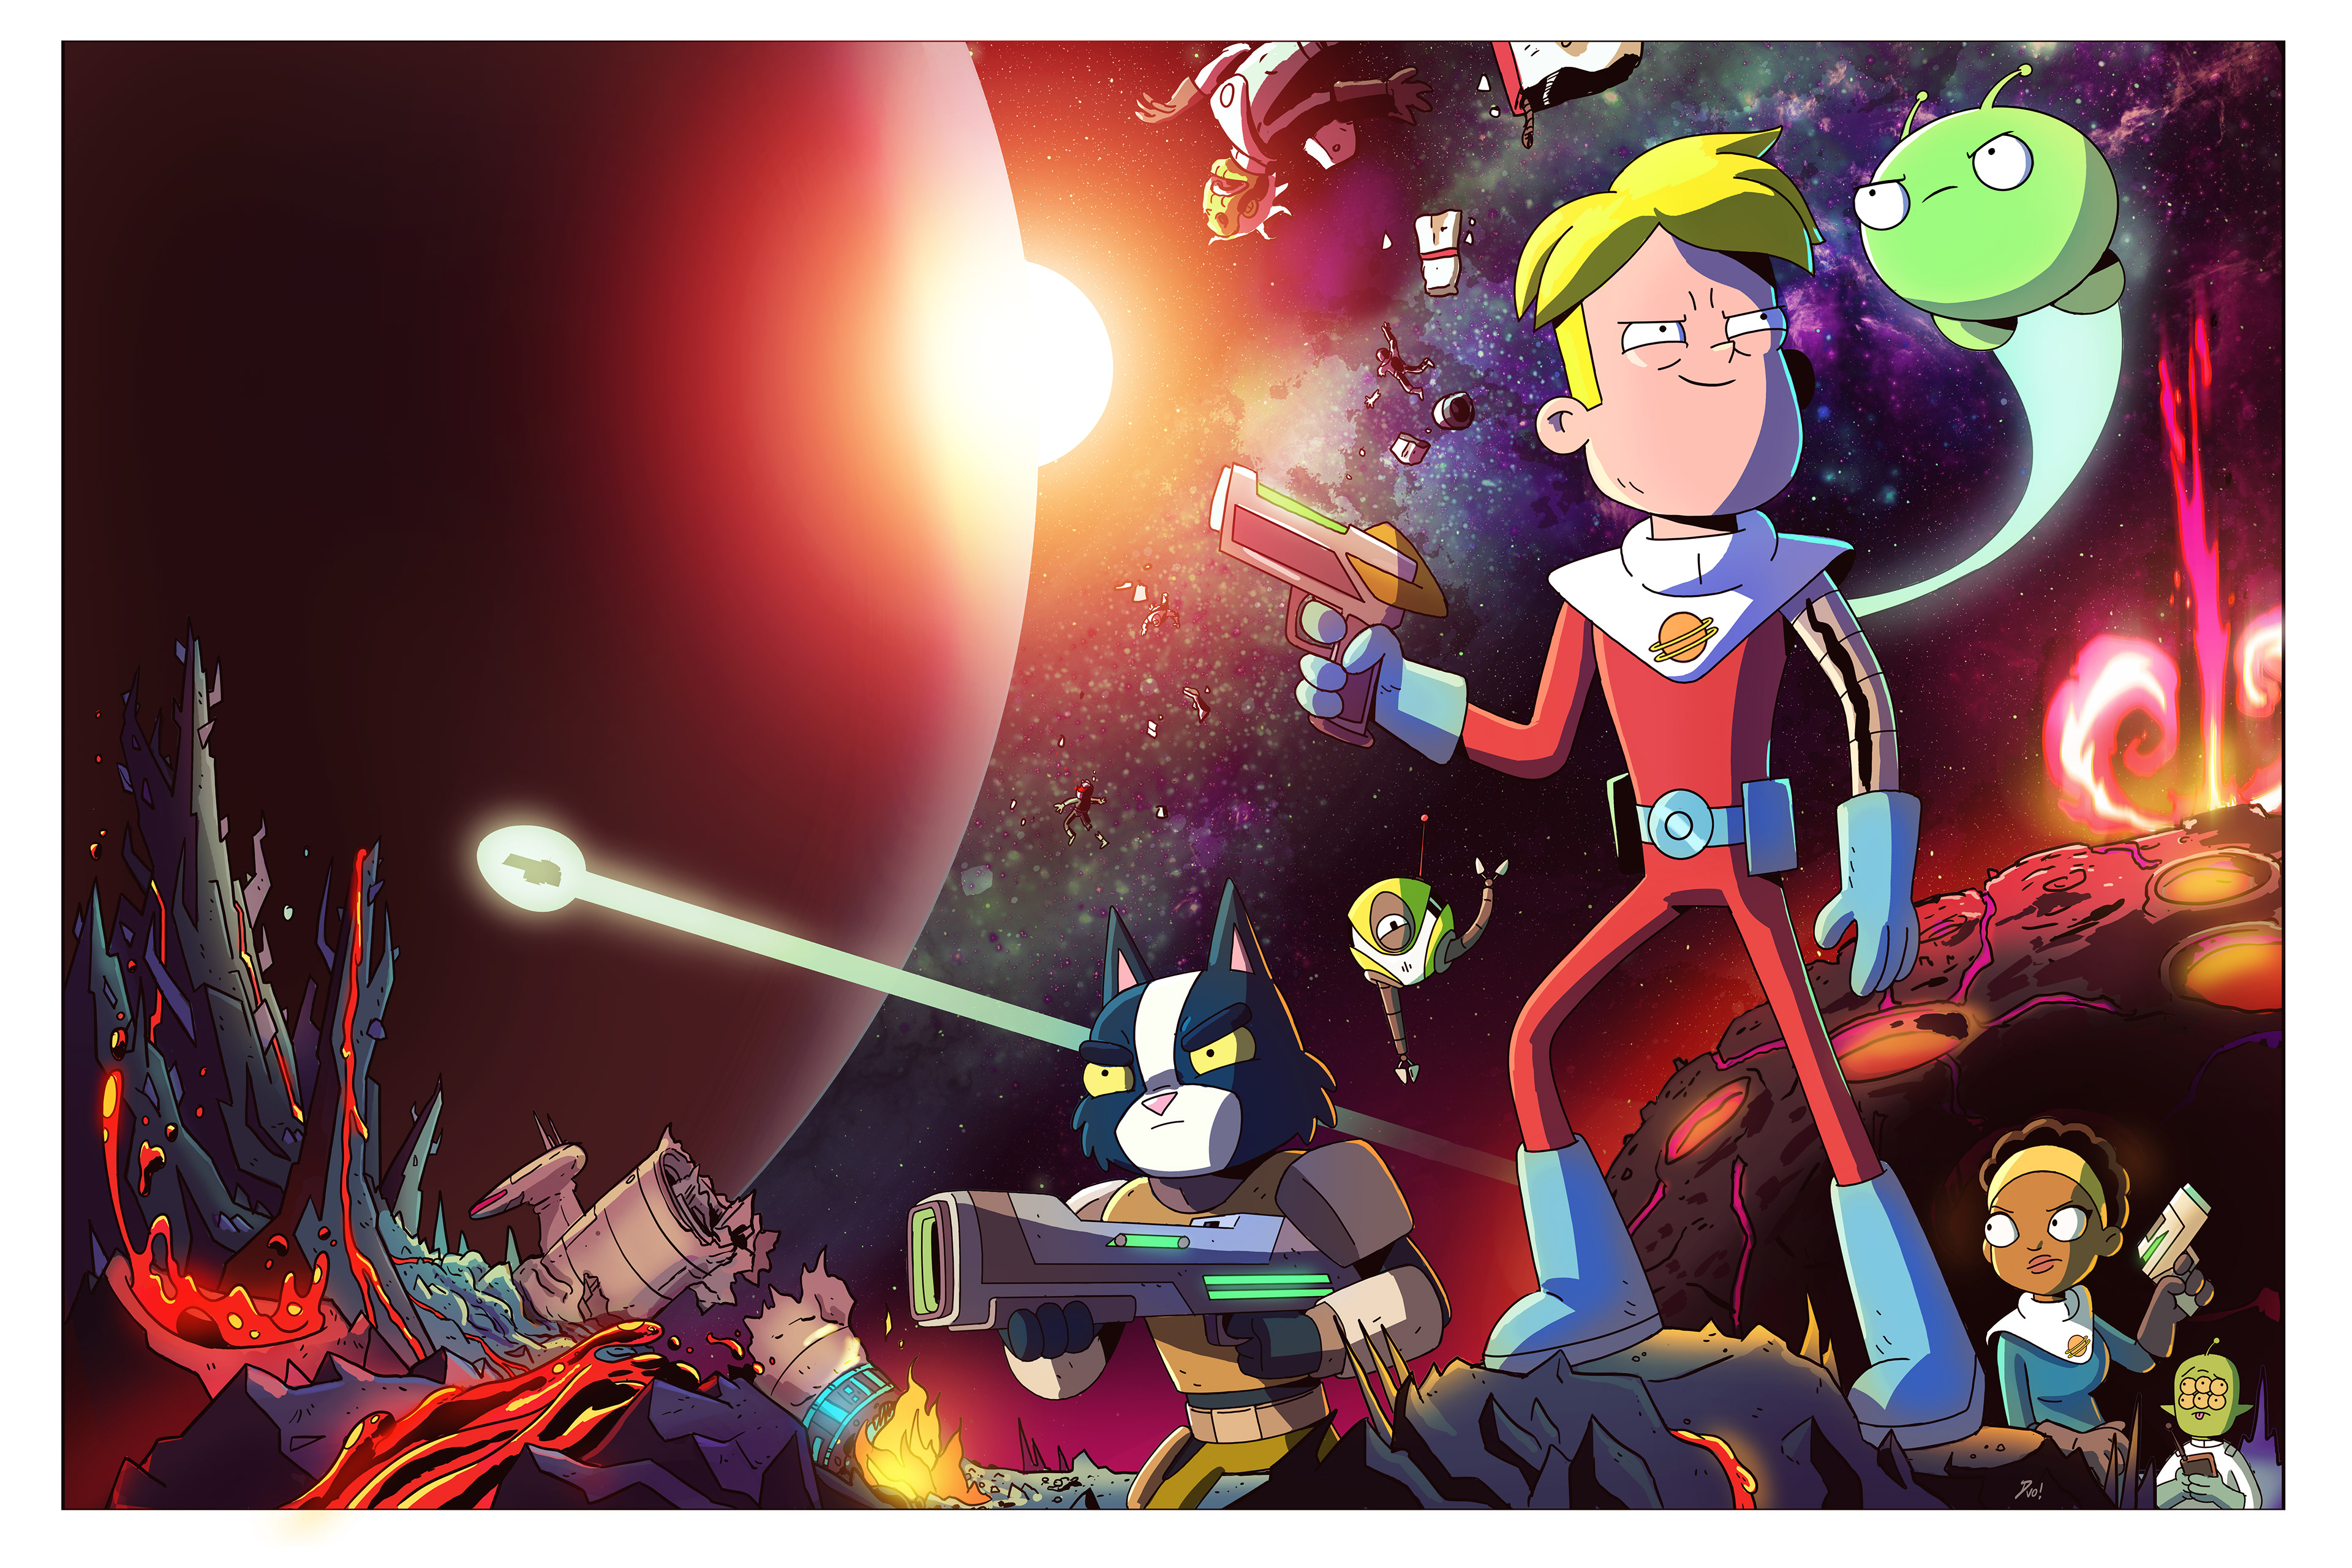 Final Space Animation Poster - Diamond Painting 